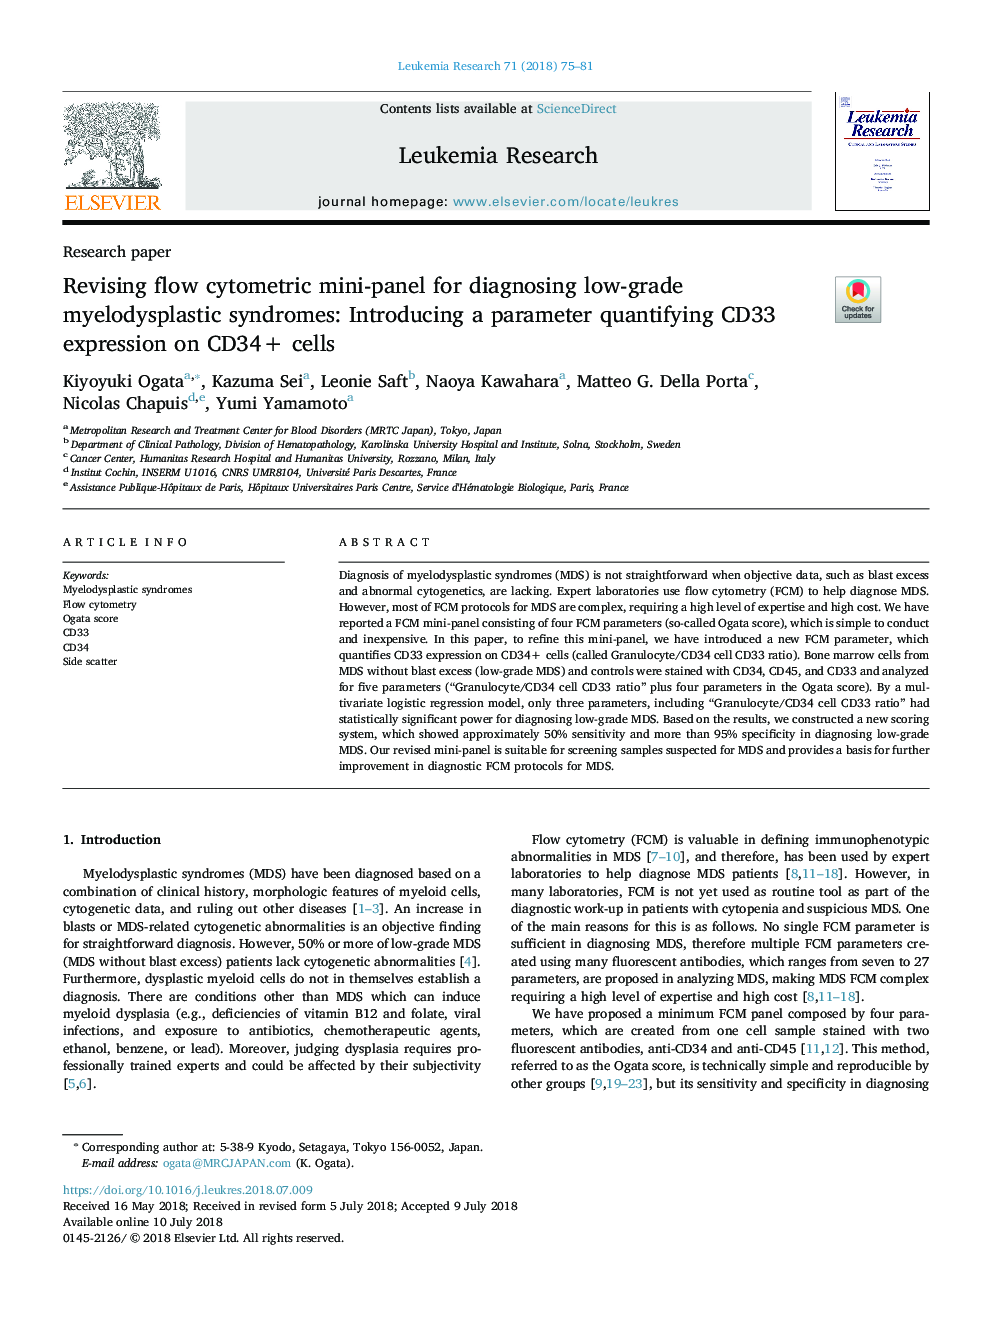 Revising flow cytometric mini-panel for diagnosing low-grade myelodysplastic syndromes: Introducing a parameter quantifying CD33 expression on CD34+ cells